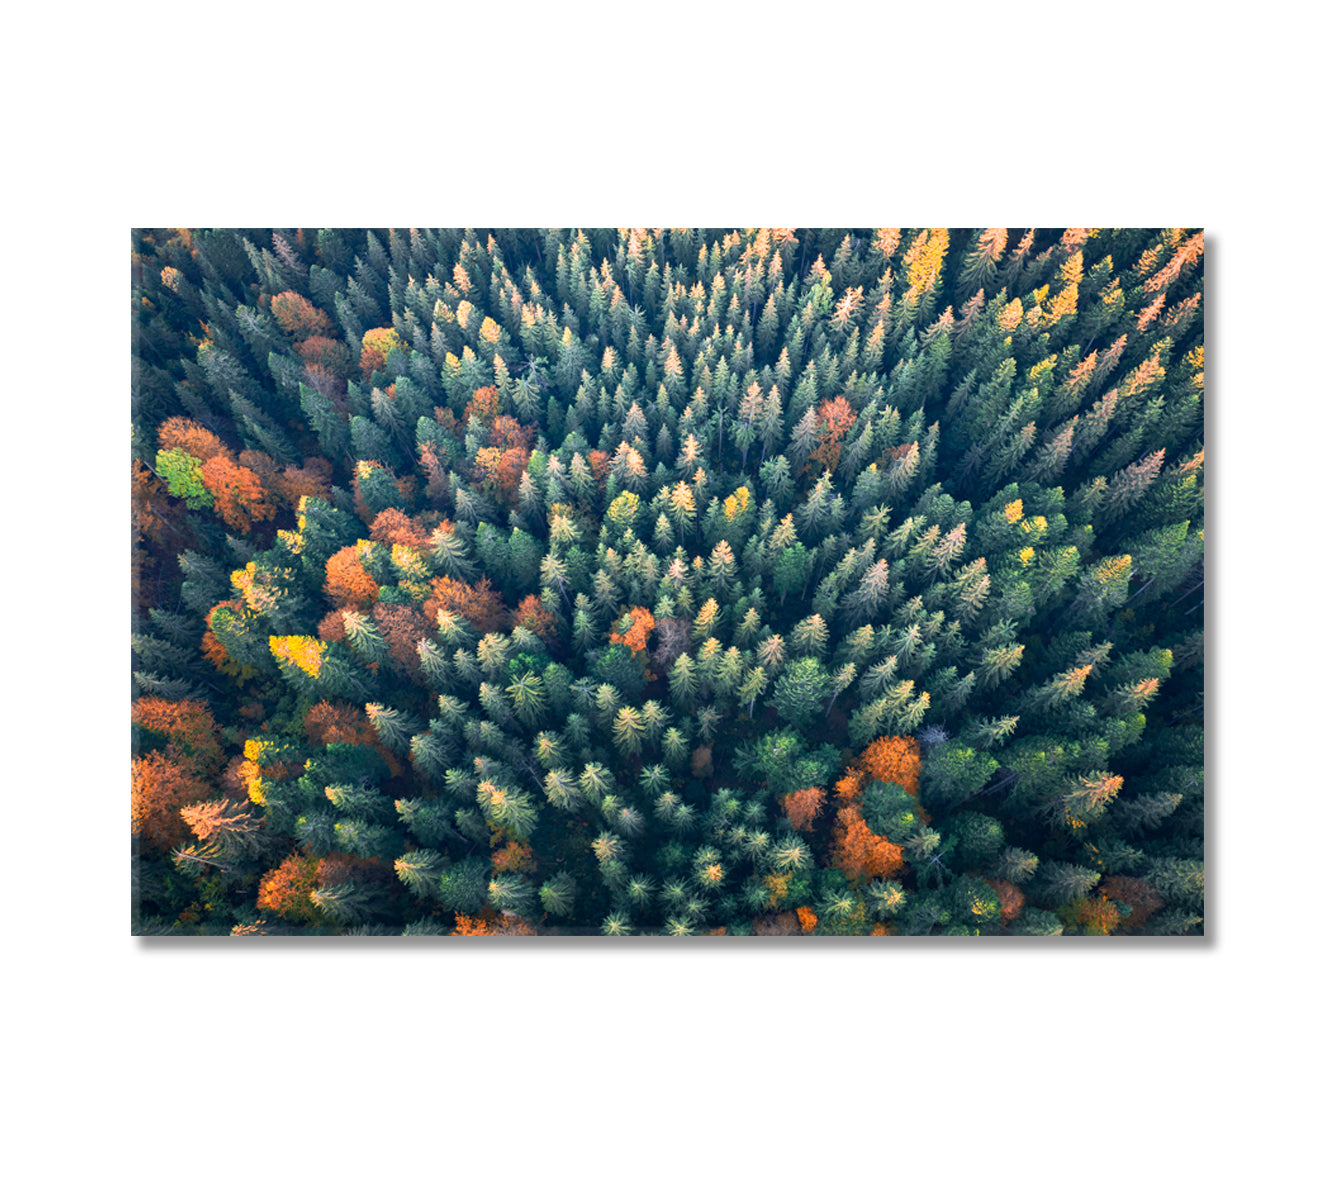 Yellow and Green Autumn Trees in Colorful Forest Canvas Print-Canvas Print-CetArt-1 Panel-24x16 inches-CetArt